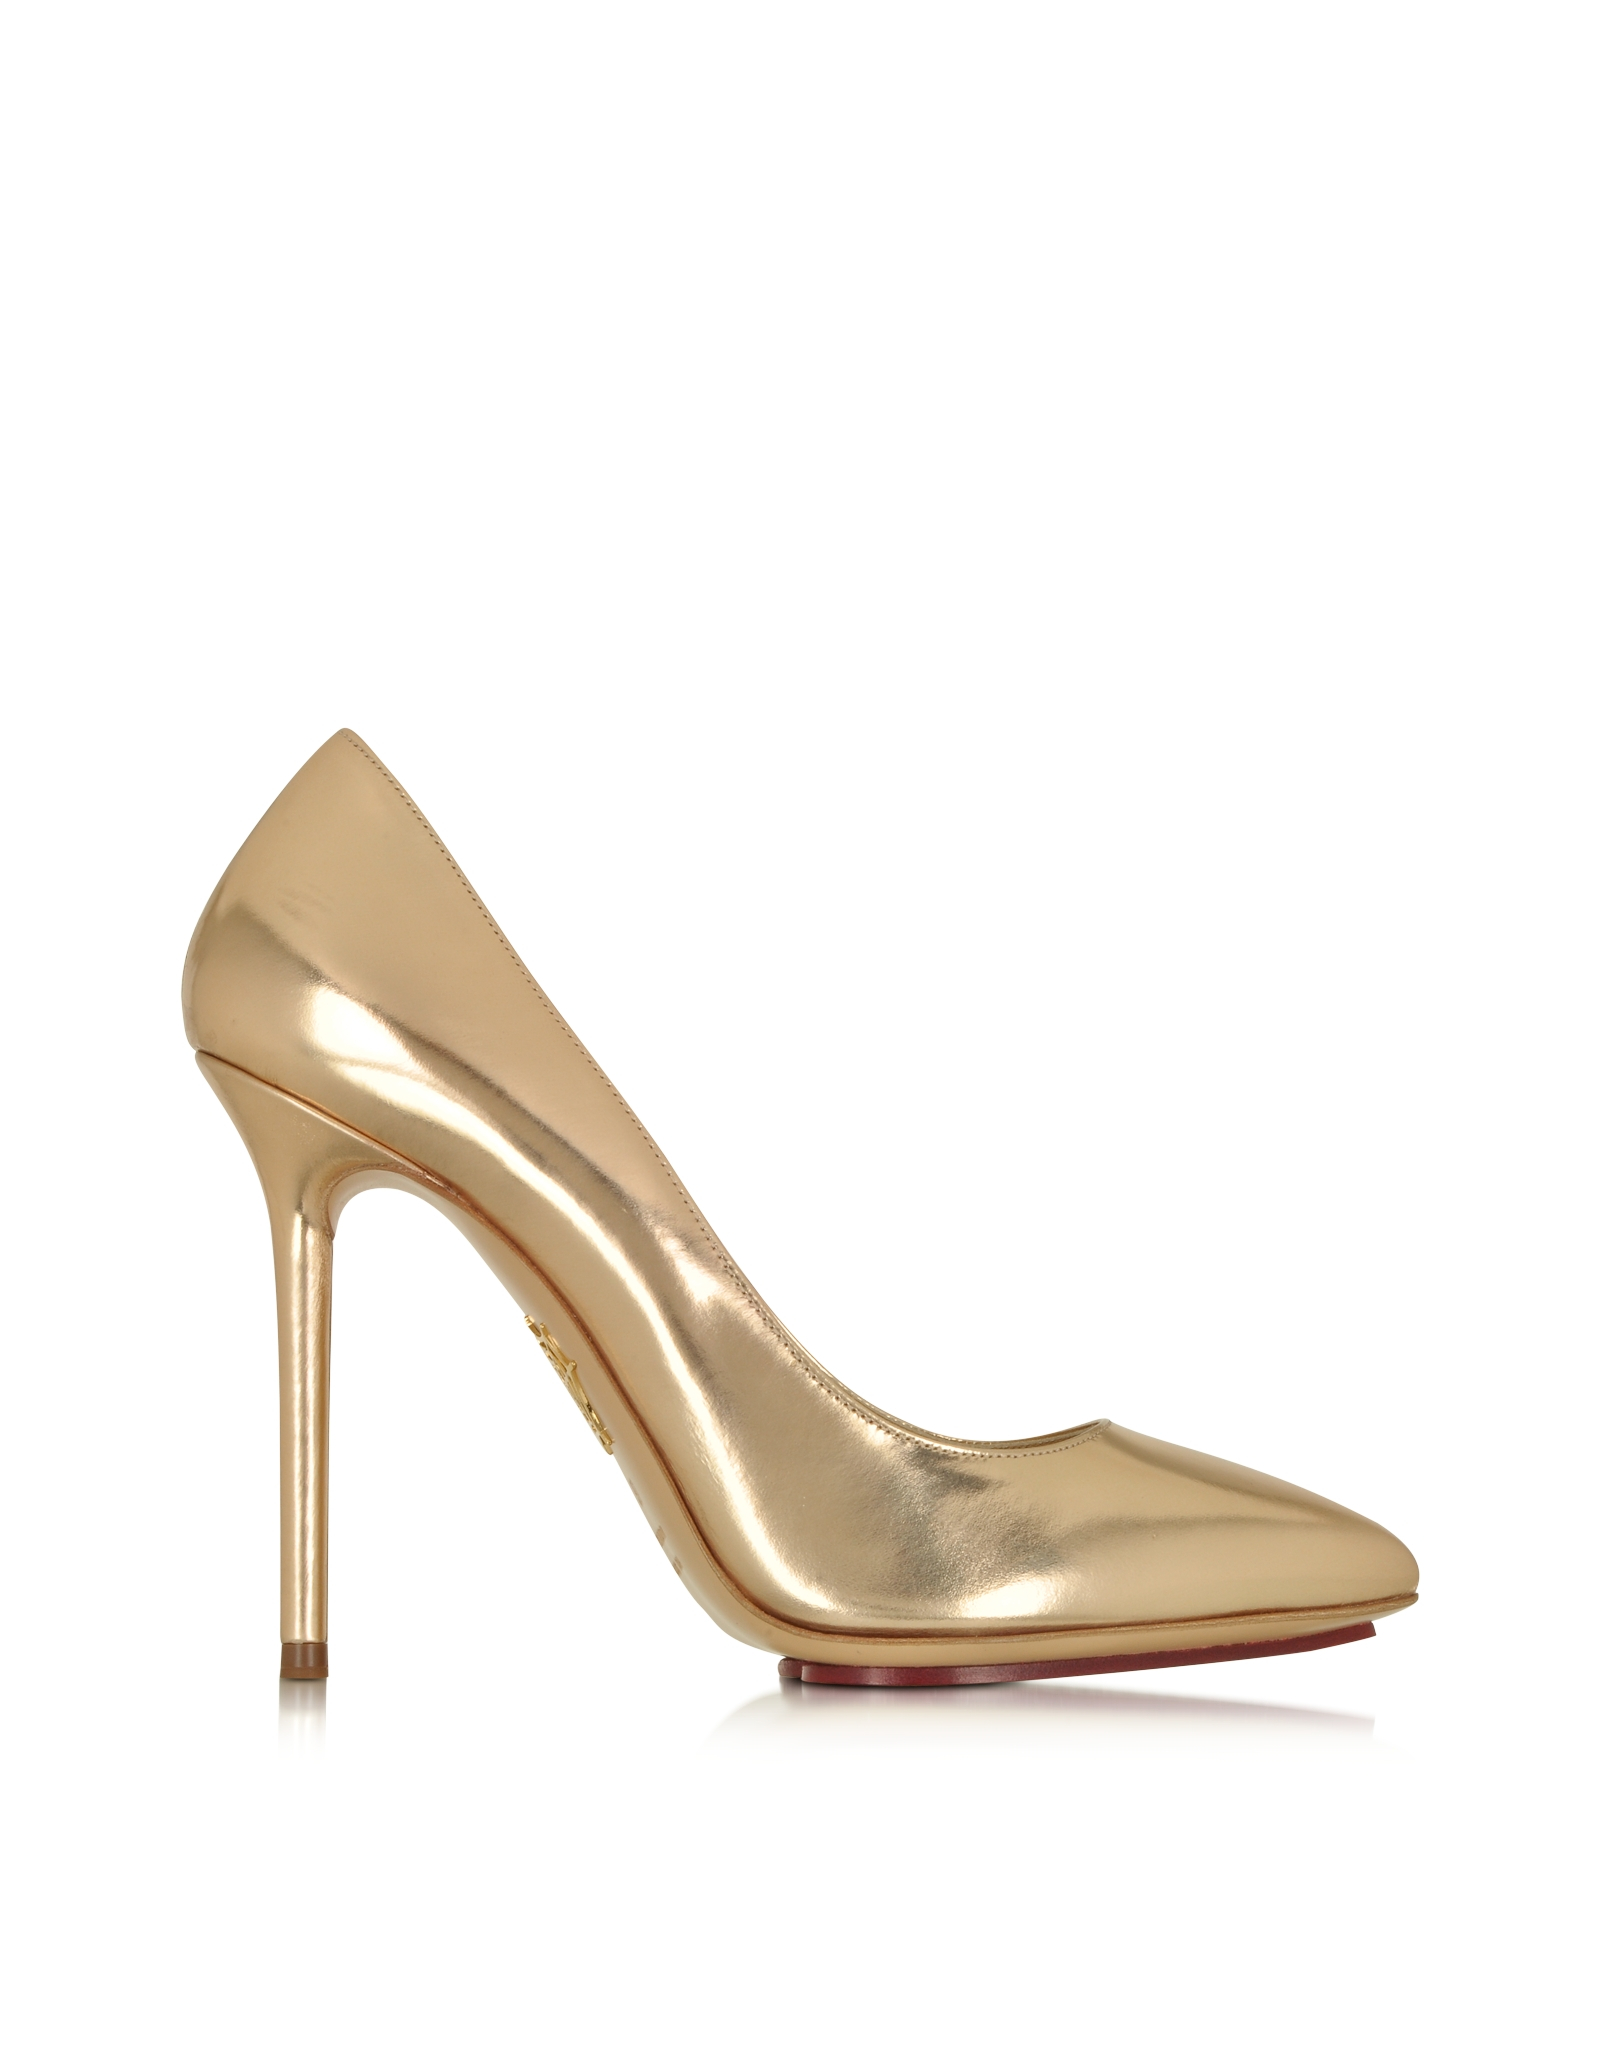 Lyst - Charlotte olympia Monroe Rose Gold Metallic Leather Pump in Pink